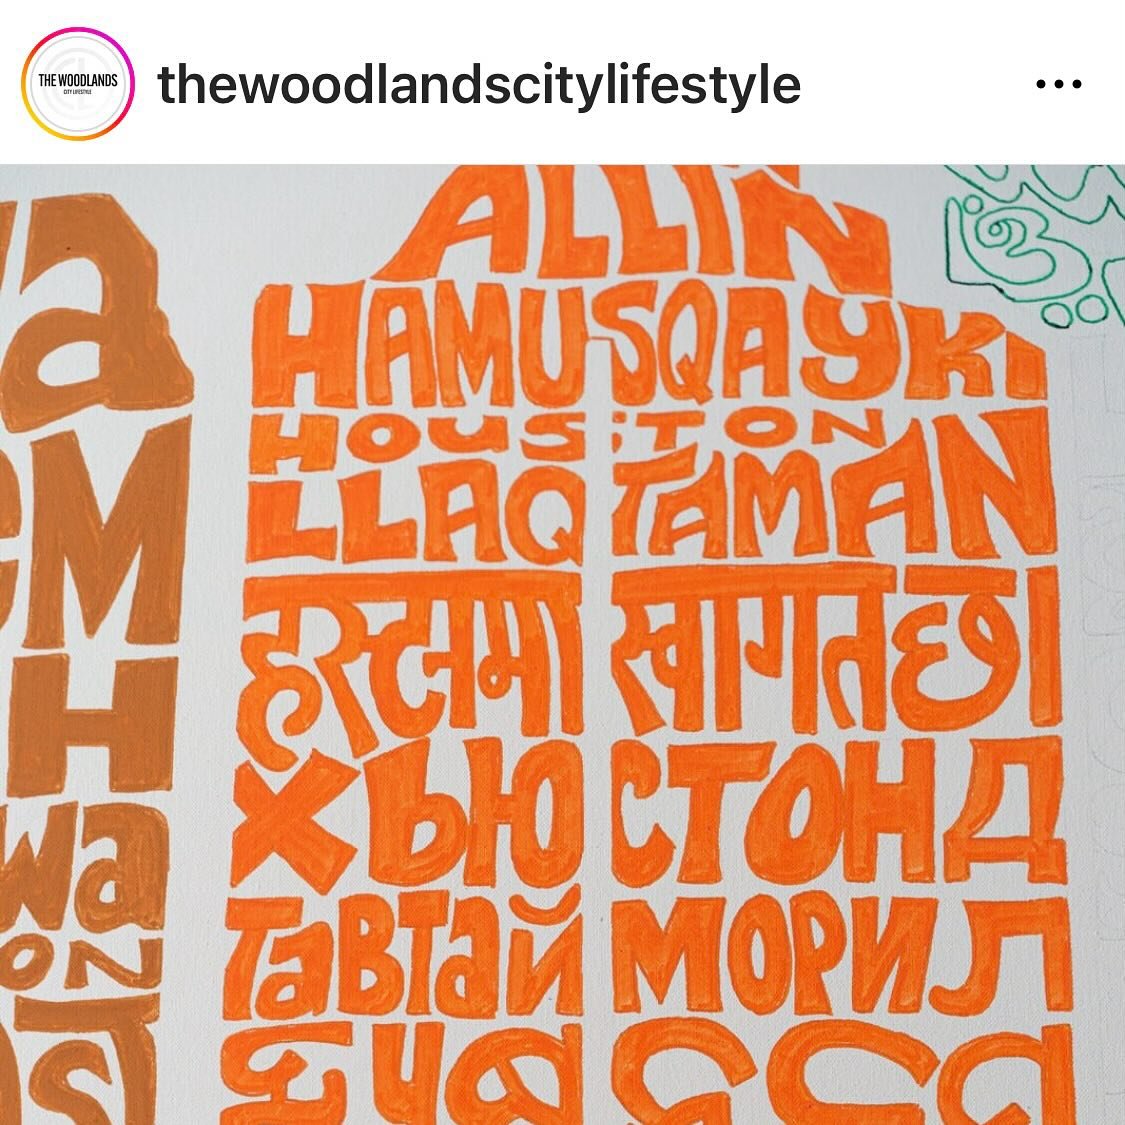 Thank you so much, @thewoodlandscitylifestyle 🎉
.
.
This project was commissioned by @houstonmoca the Mayor's Office of Cultural Affairs on behalf of the Houston Airport System @houstonairports @bushairport for @Houston through the city's Civic Arts